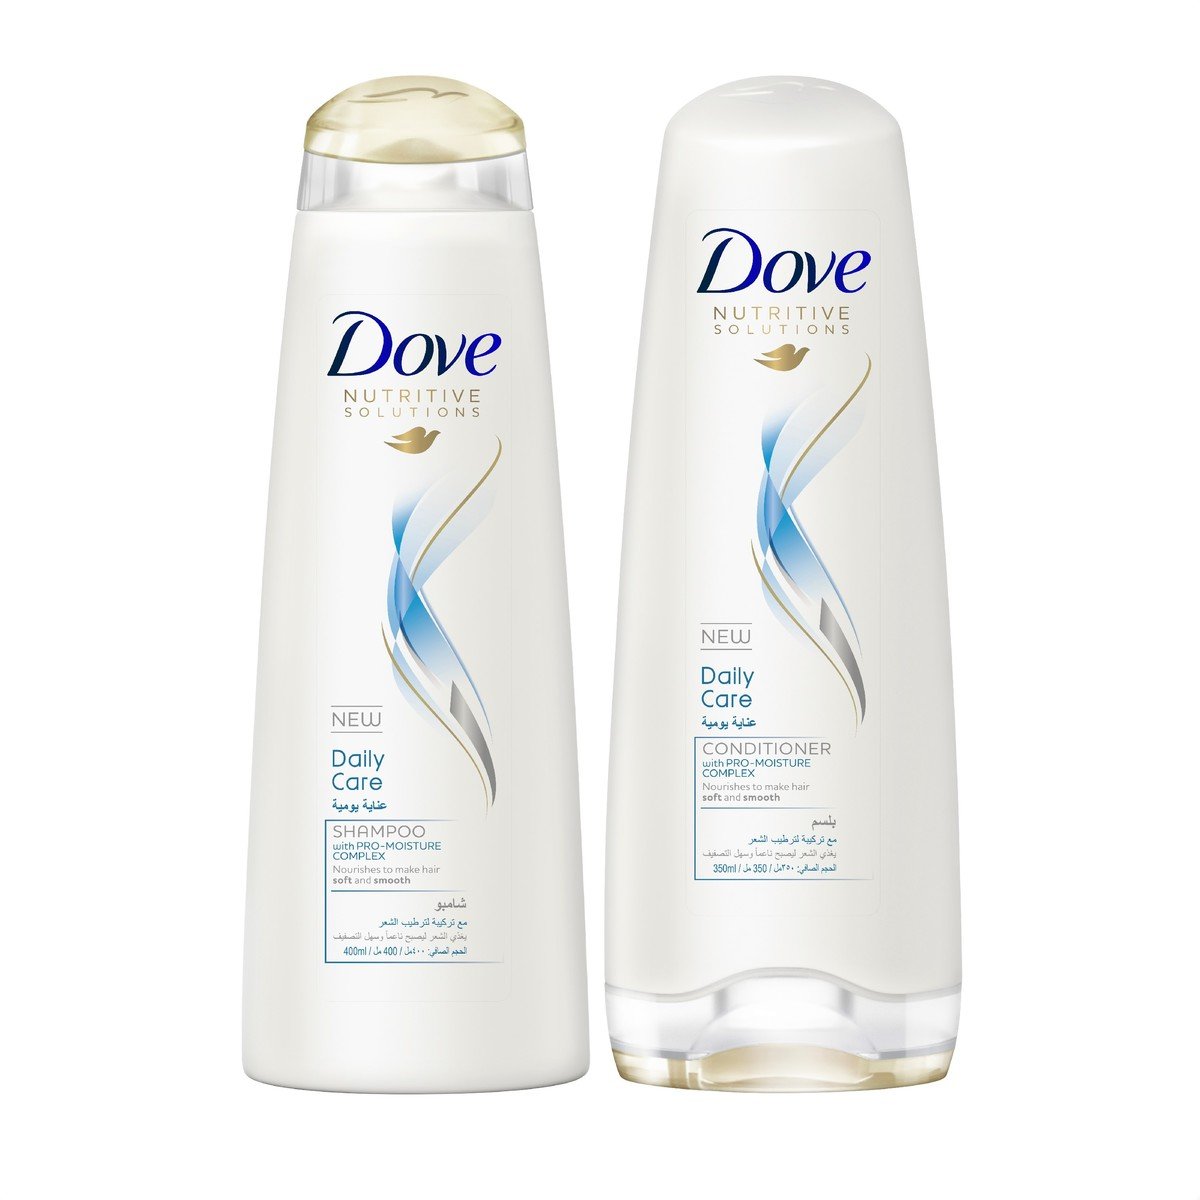 Dove Nutritive Solutions Daily Care Conditioner 350 ml